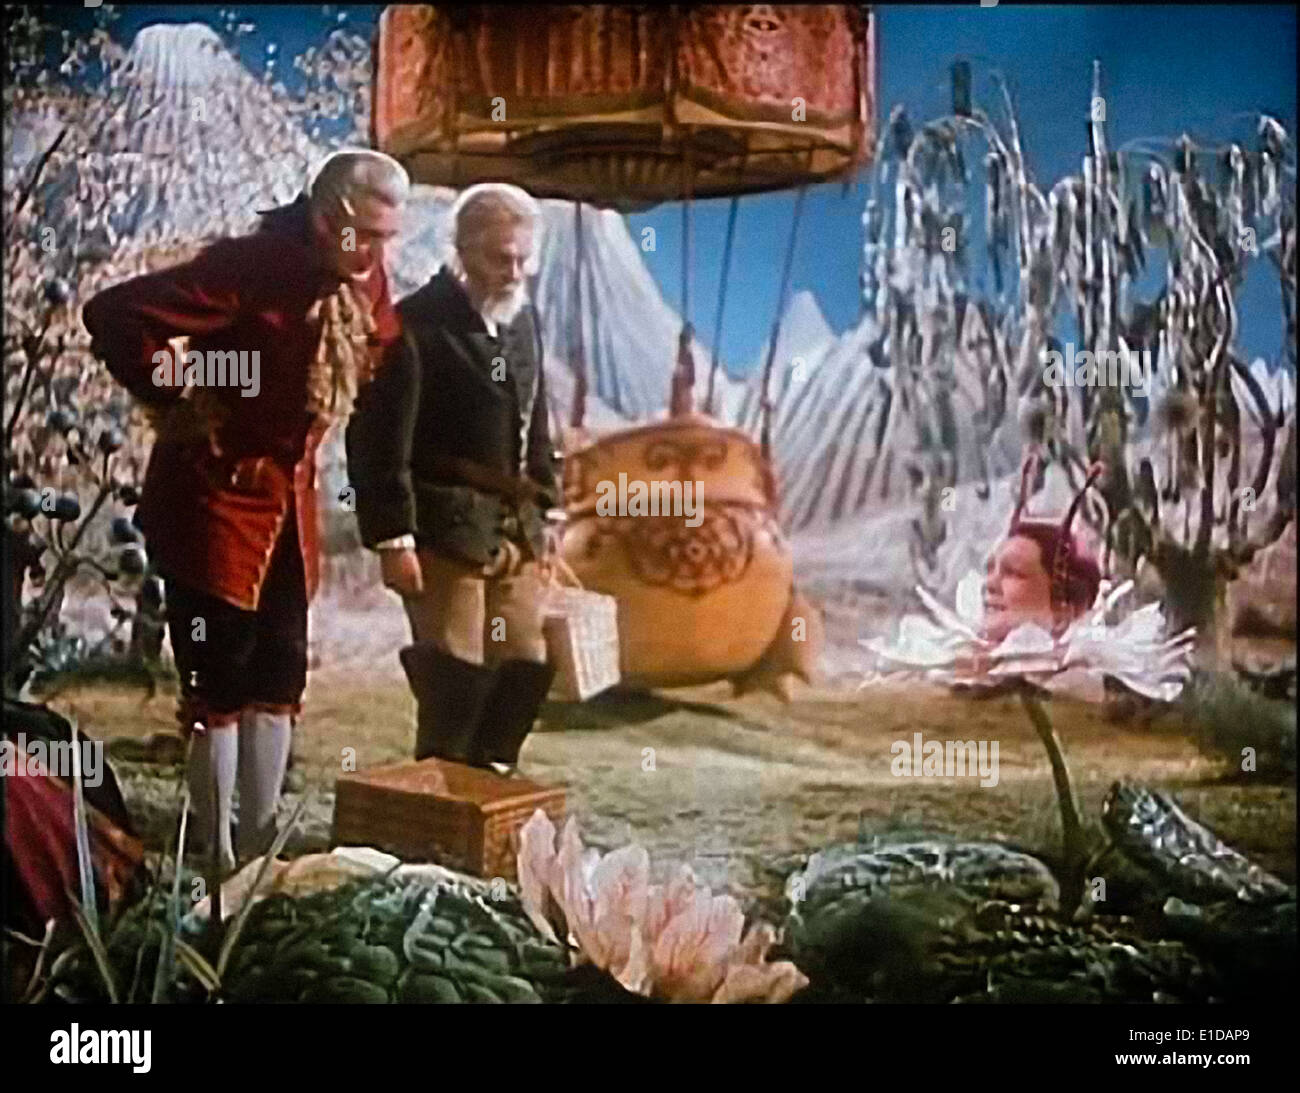 Still from ‘The Adventures of Baron Munchausen’ (Münchhausen) released in 1943 directed by Josef von Báky, starring Hans Albers. Stock Photo